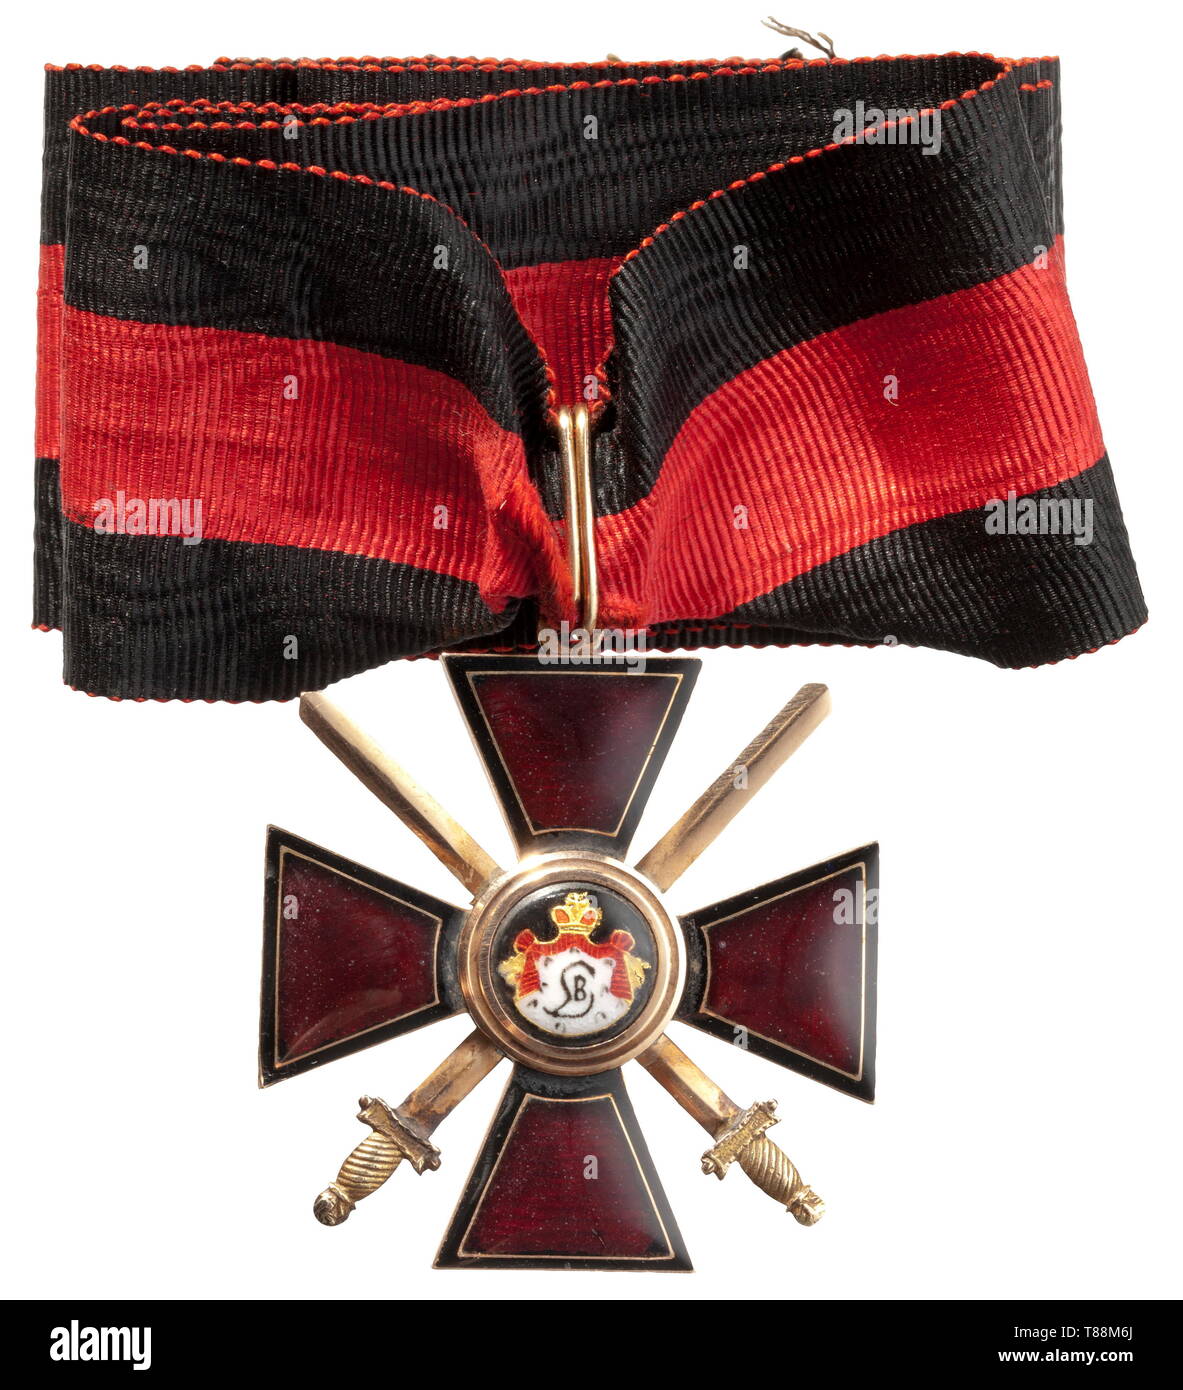 A Russian Order of St. Vladimir, 3rd Class Cross with Swords Circa 1880. Gold, the cross arms in dark red enamel. The eyelet with St. Petersburg fineness mark for 56 zolotniki and an illegible maker's mark in Cyrillic 'F..'. Dimensions 46 x 43 mm, weight 14 g. Two cross arms with minimal chips. With original ribbon, length 31 cm. historic, historical, medal, decoration, medals, decorations, badge of honour, badge of honor, badges of honour, badges of honor, 19th century, Additional-Rights-Clearance-Info-Not-Available Stock Photo